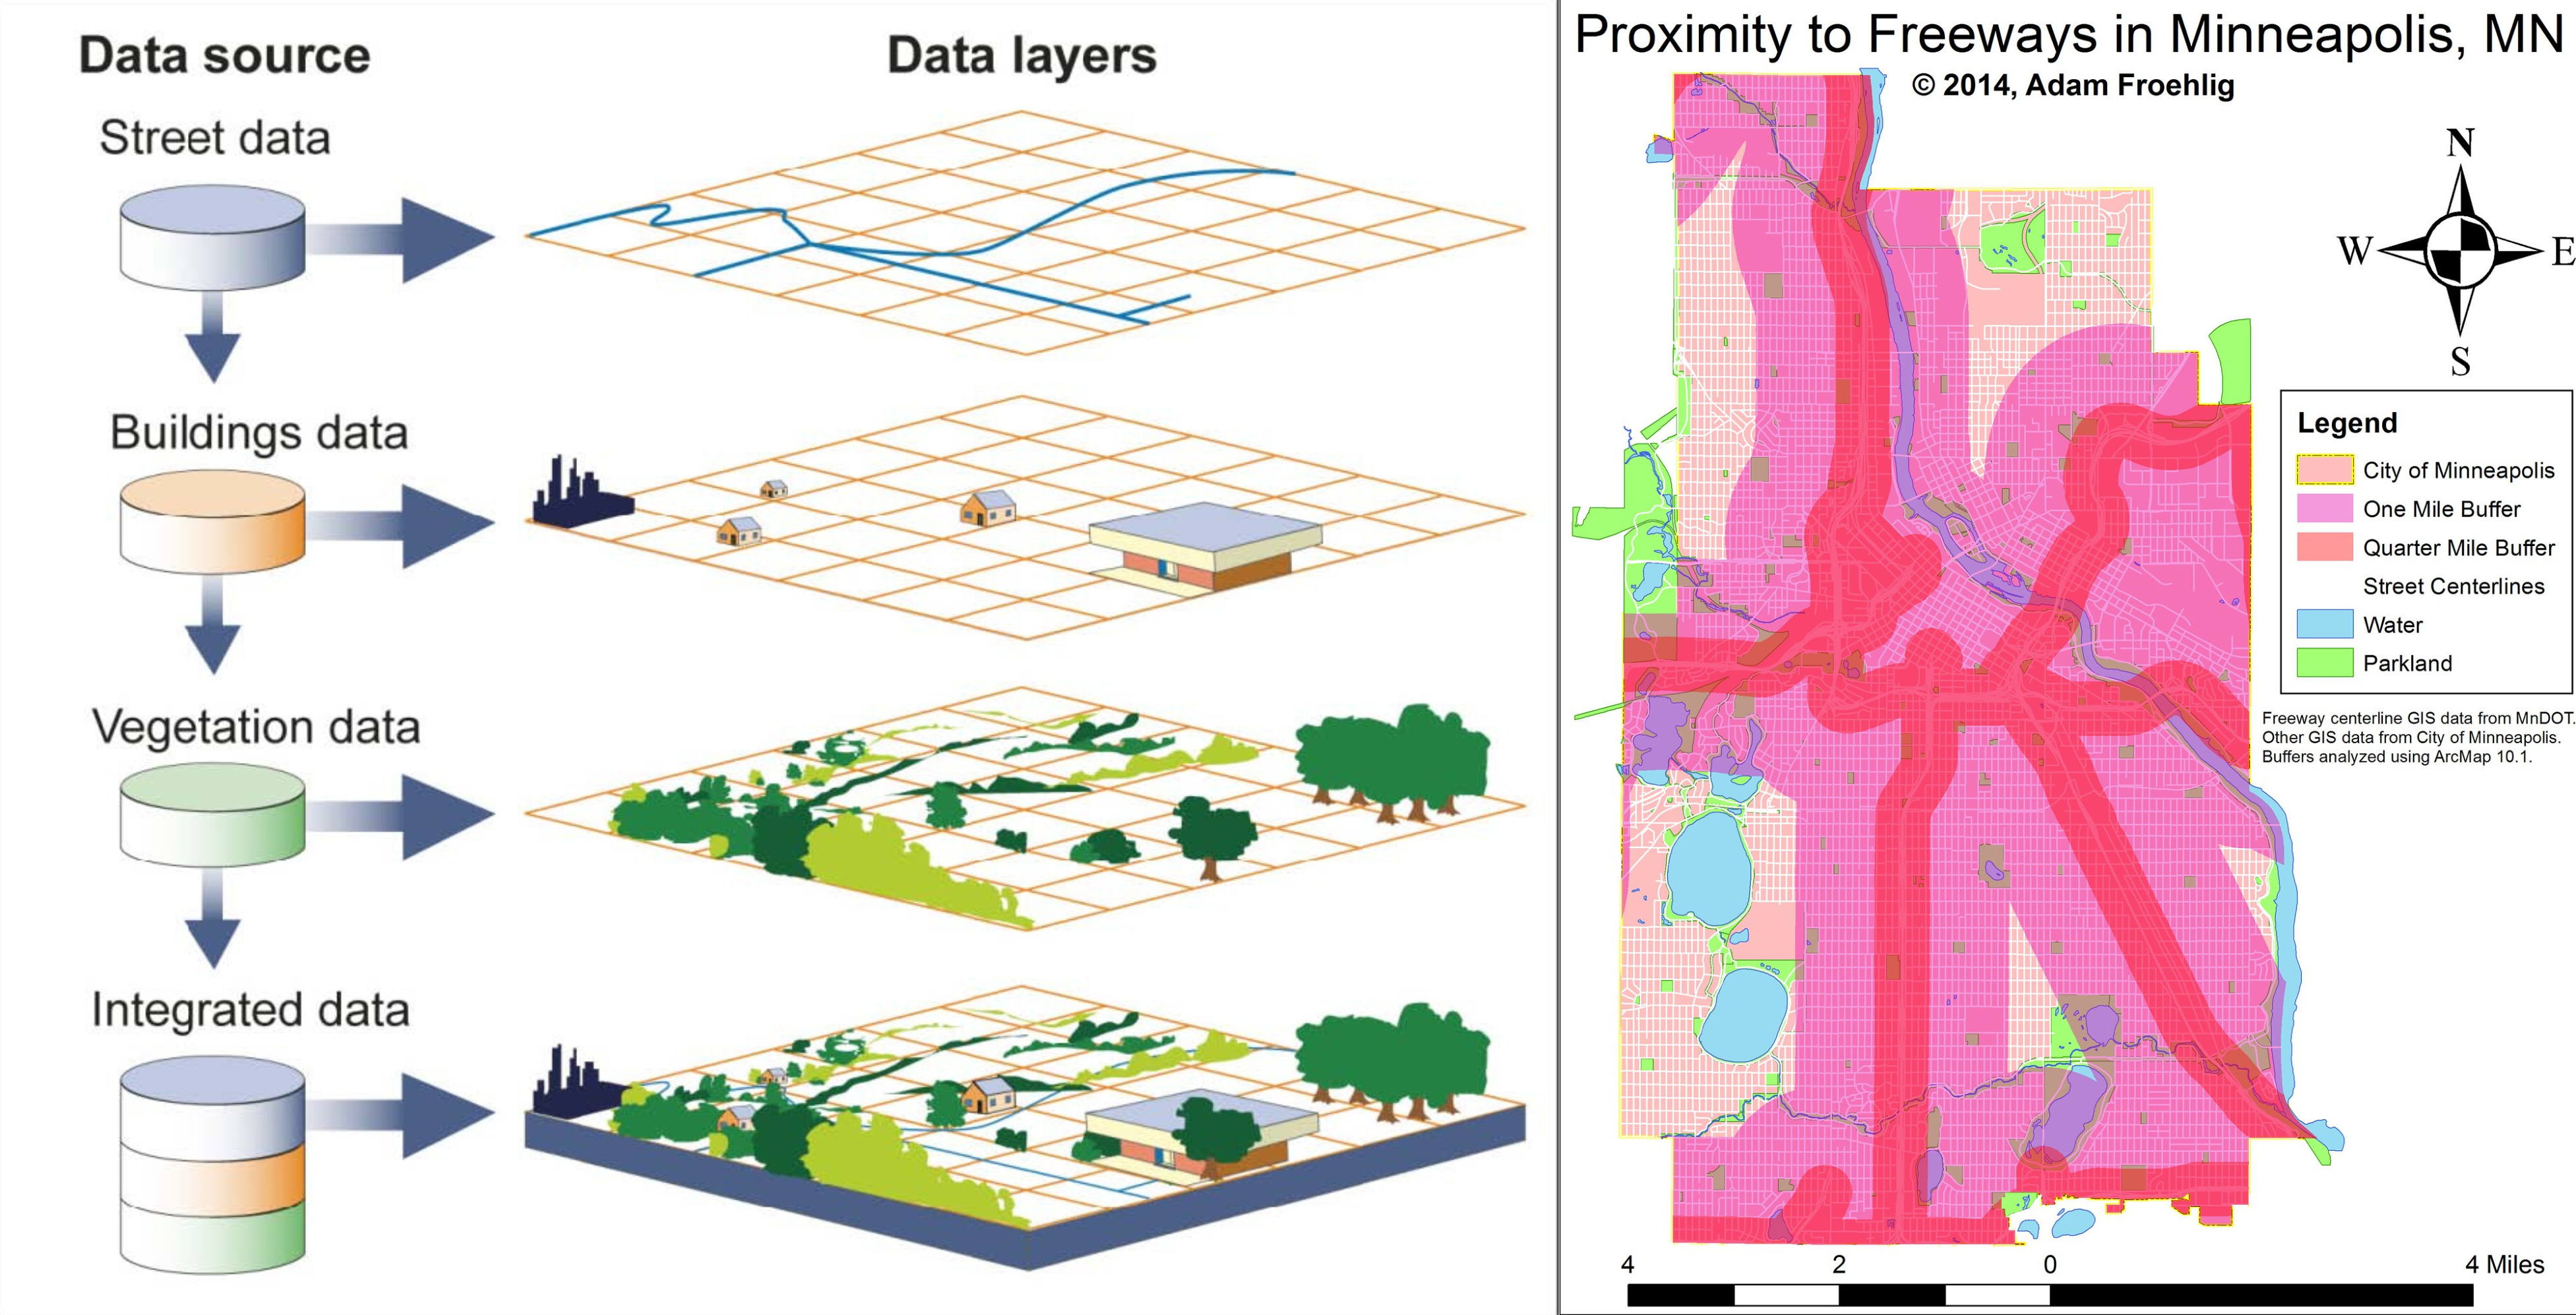 Street, buildings, and vegetation data layers of a GIS with a GIS example from Minneapolis